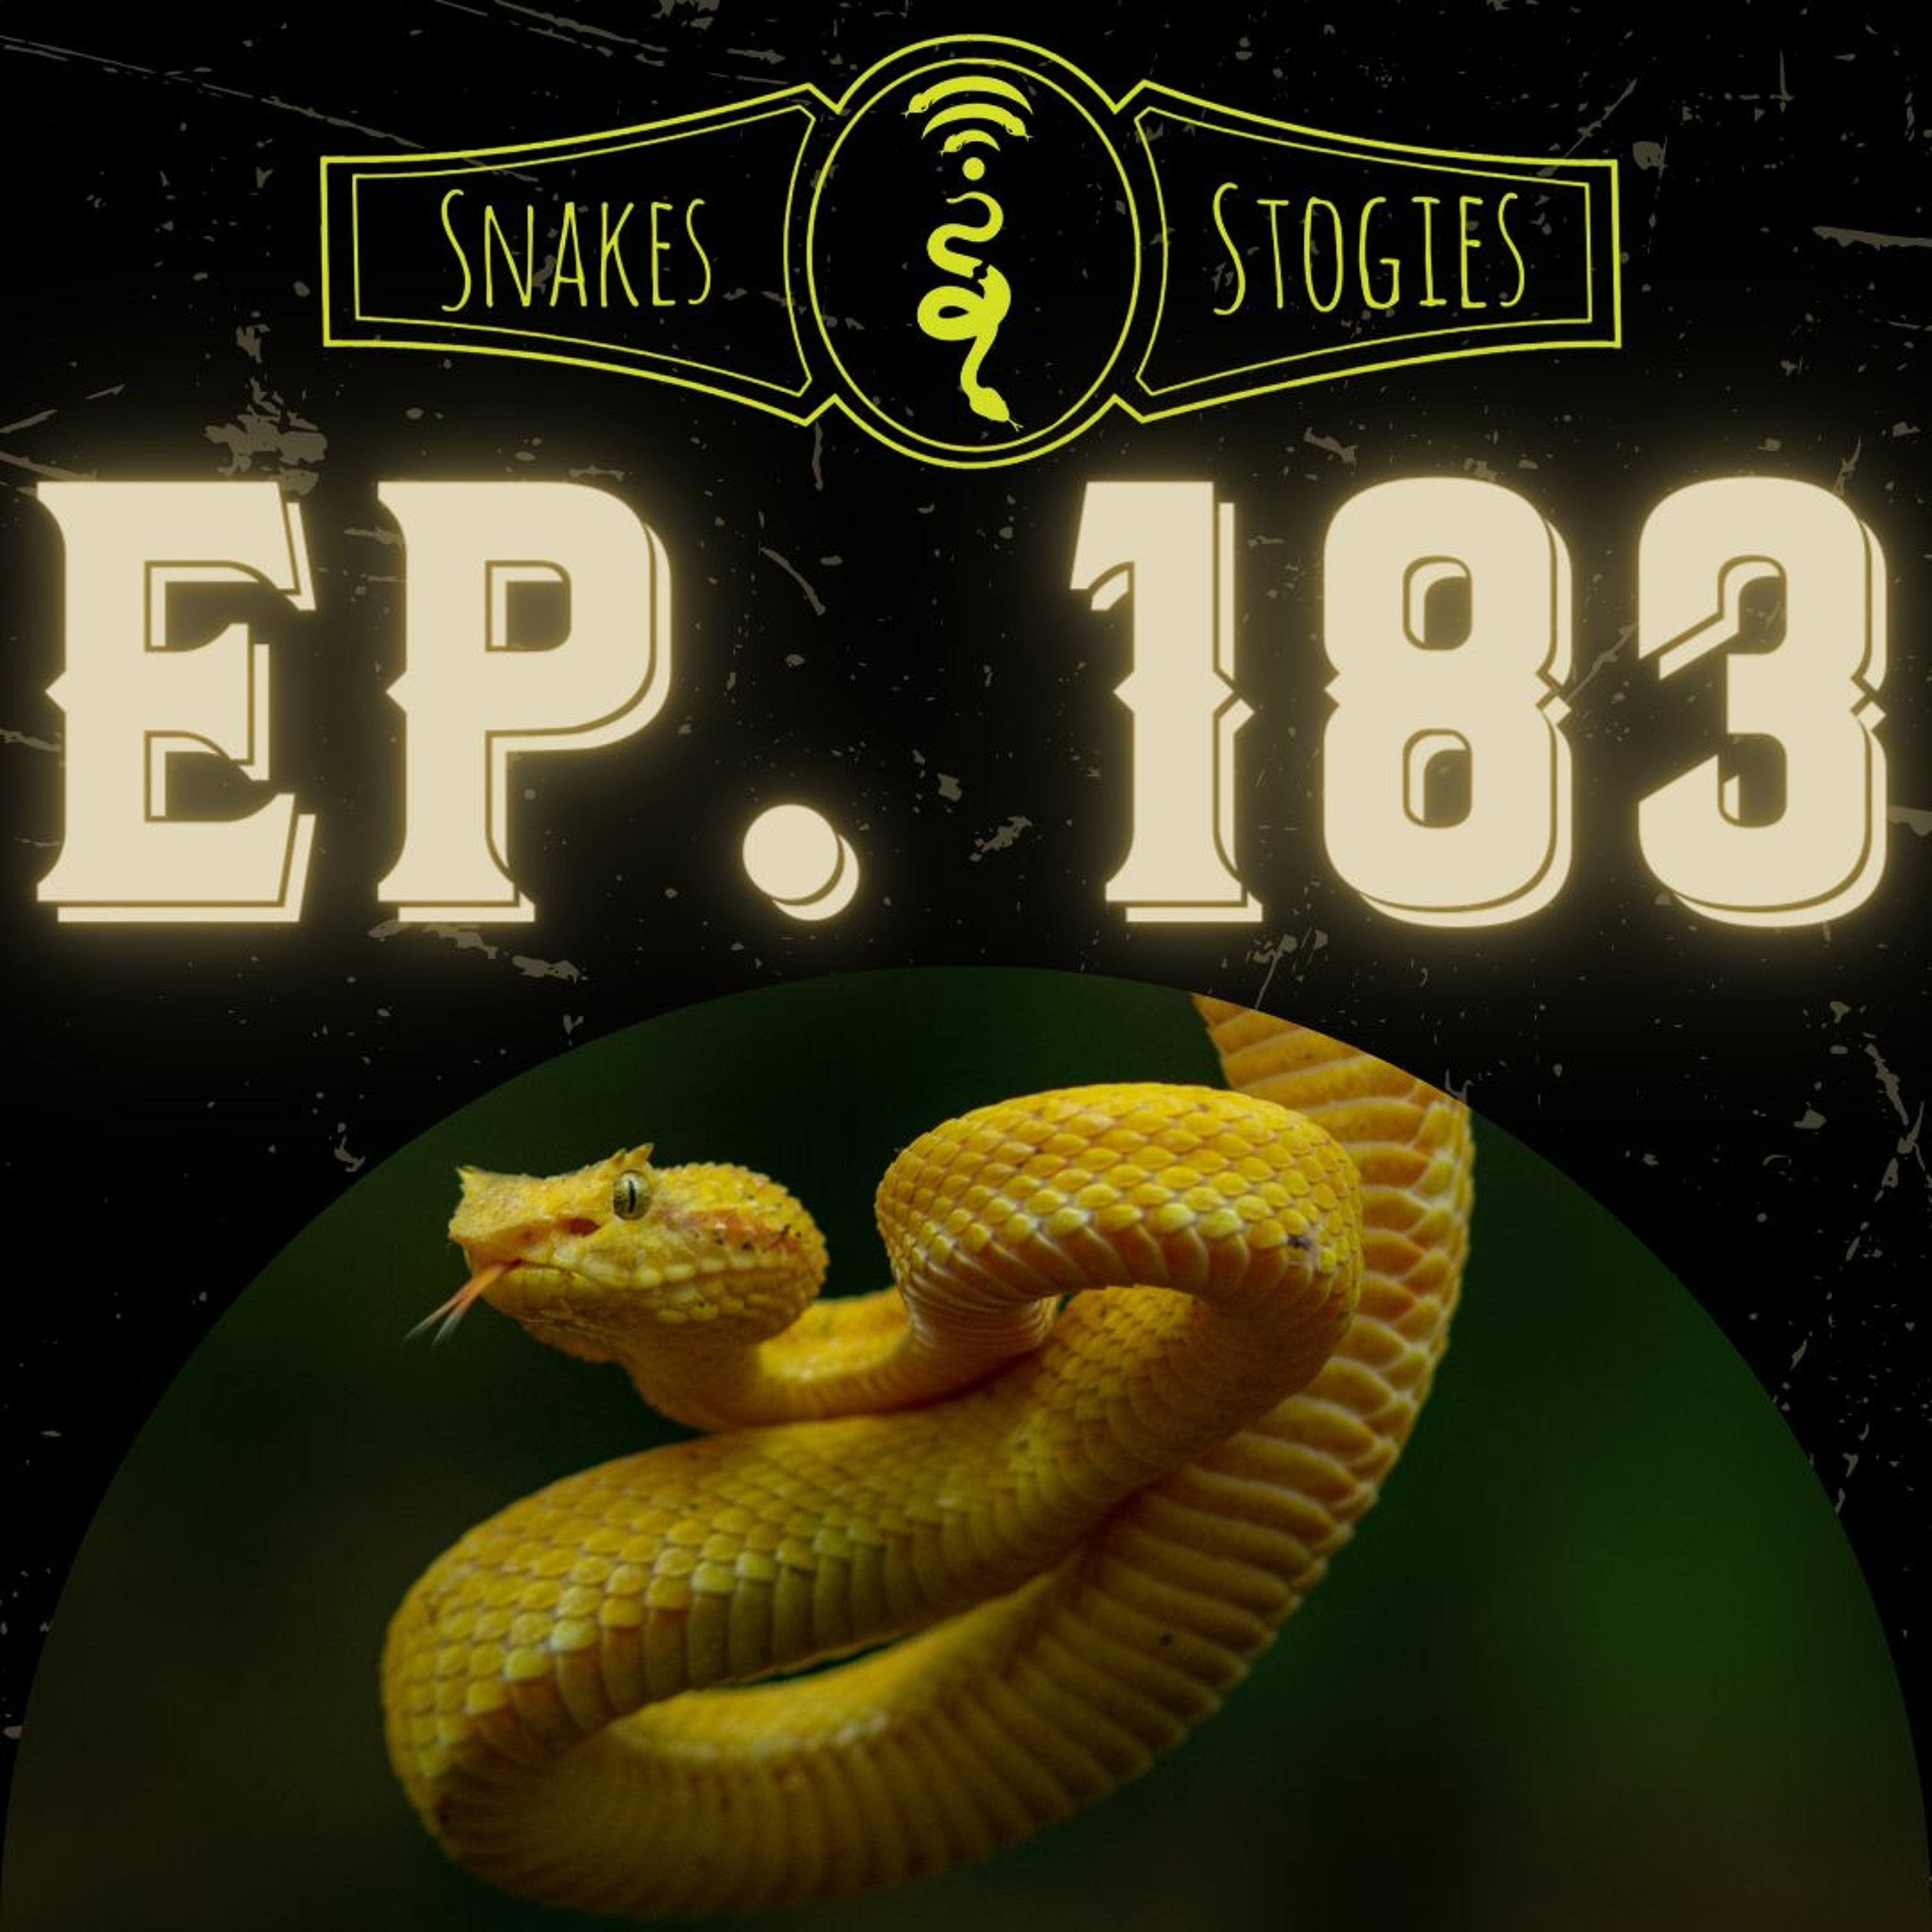 Aaron Gerson of The Forked Tongue | Snakes & Stogies Ep. 183